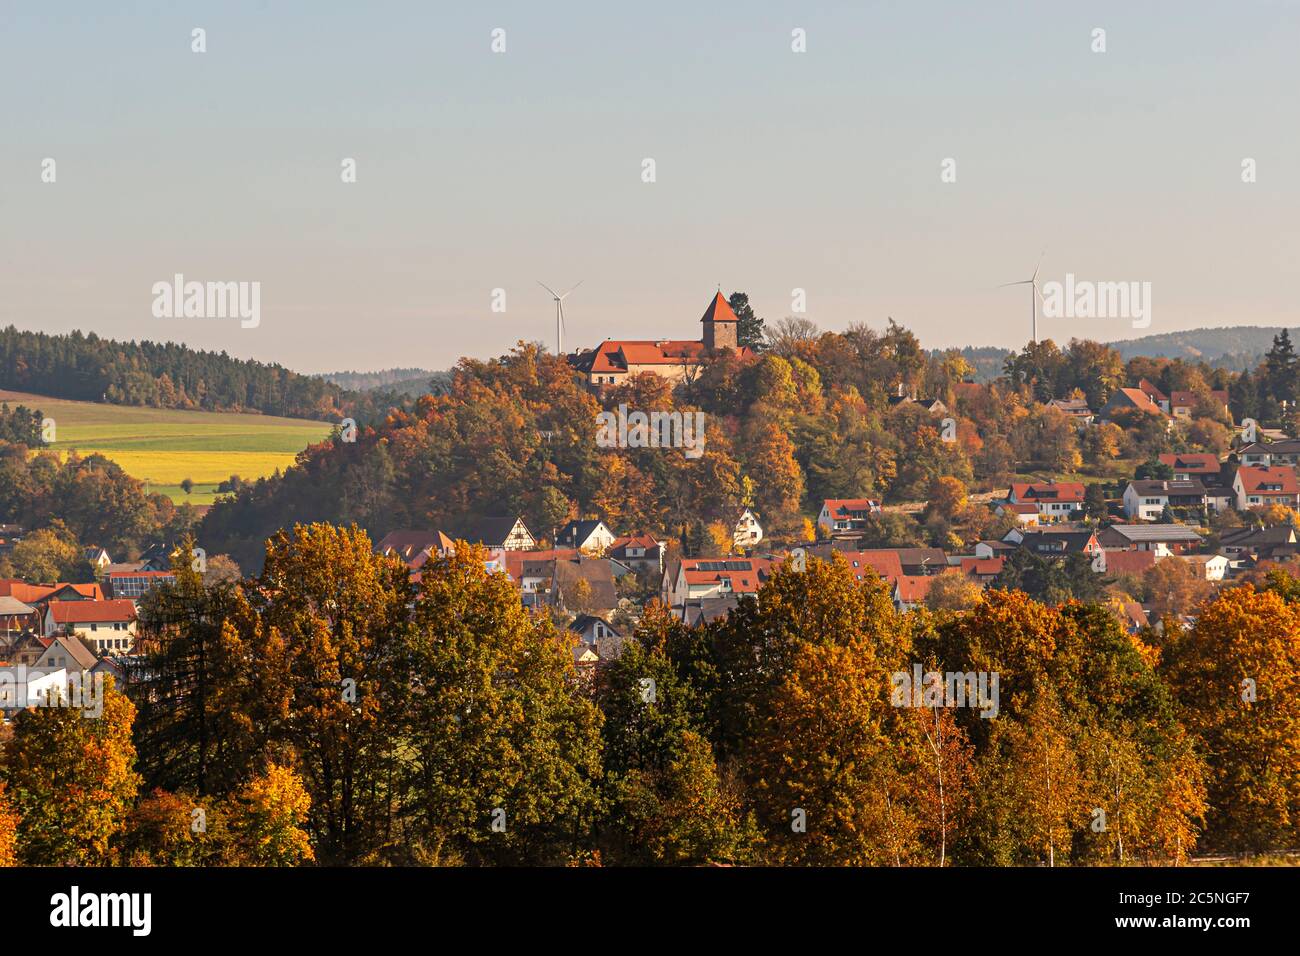 Wernberg castle is located on a mountain above the village Wernberg-Köblitz, Germany Stock Photo